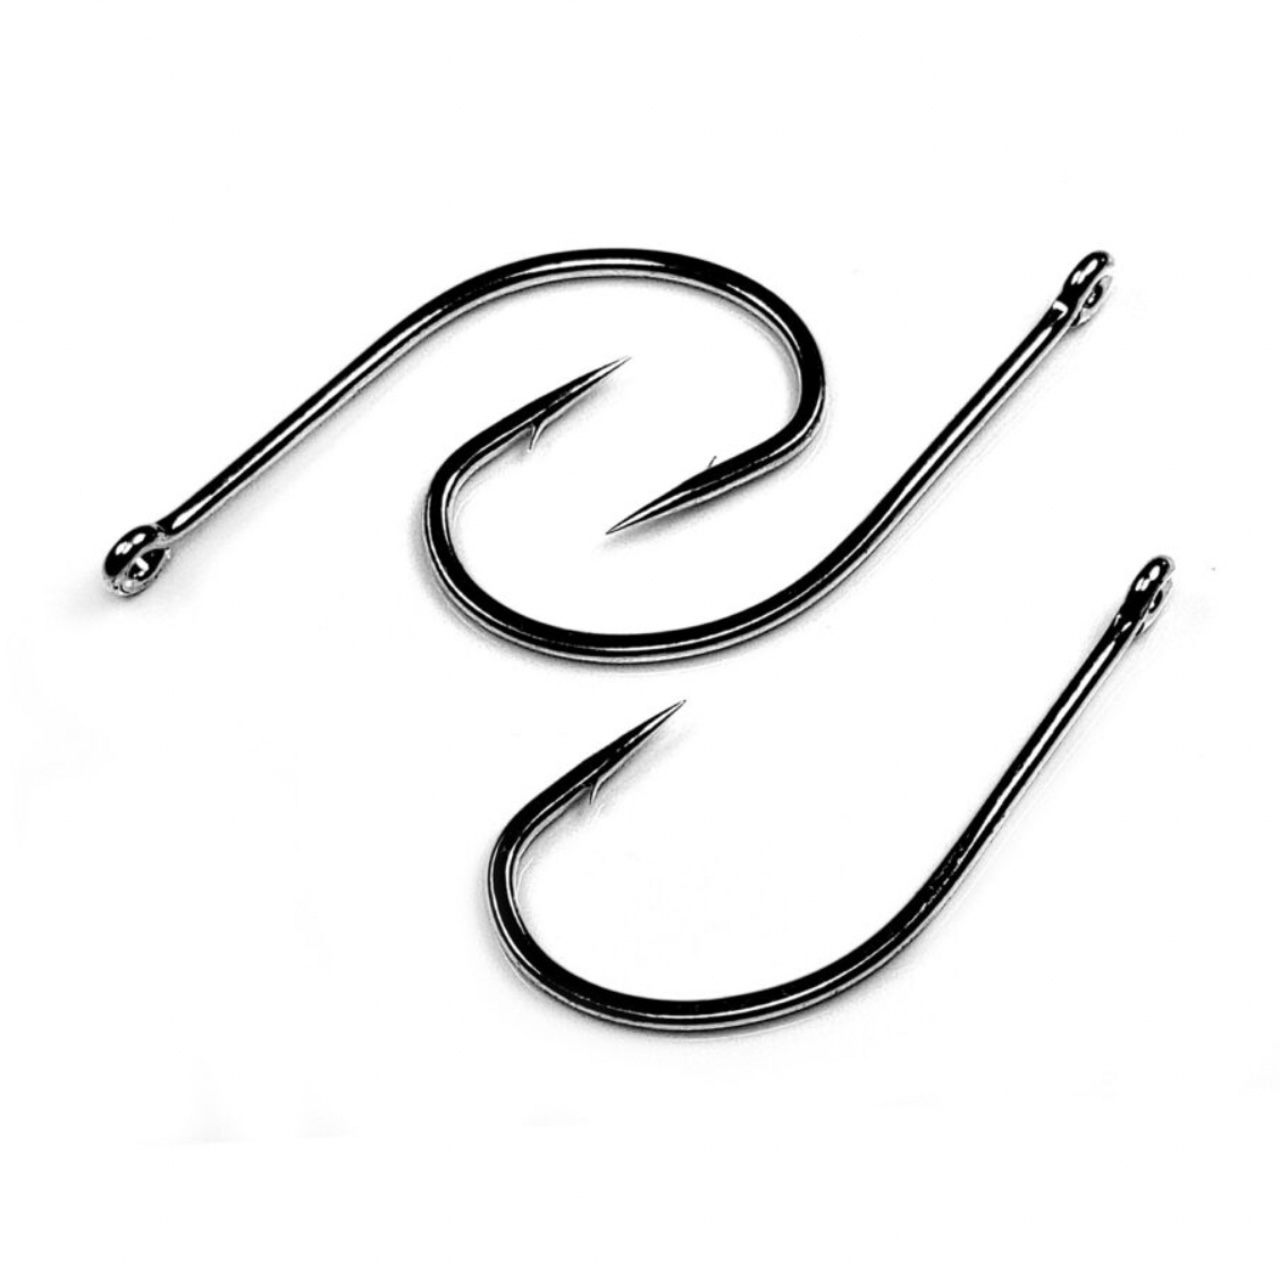 Mustad Classic 2 Extra Strong in Line Point Duratin Circle Fishing Hook |  Strong for Heavy Tuna | Fewer Deep Hooks For Catch and Release, [Size